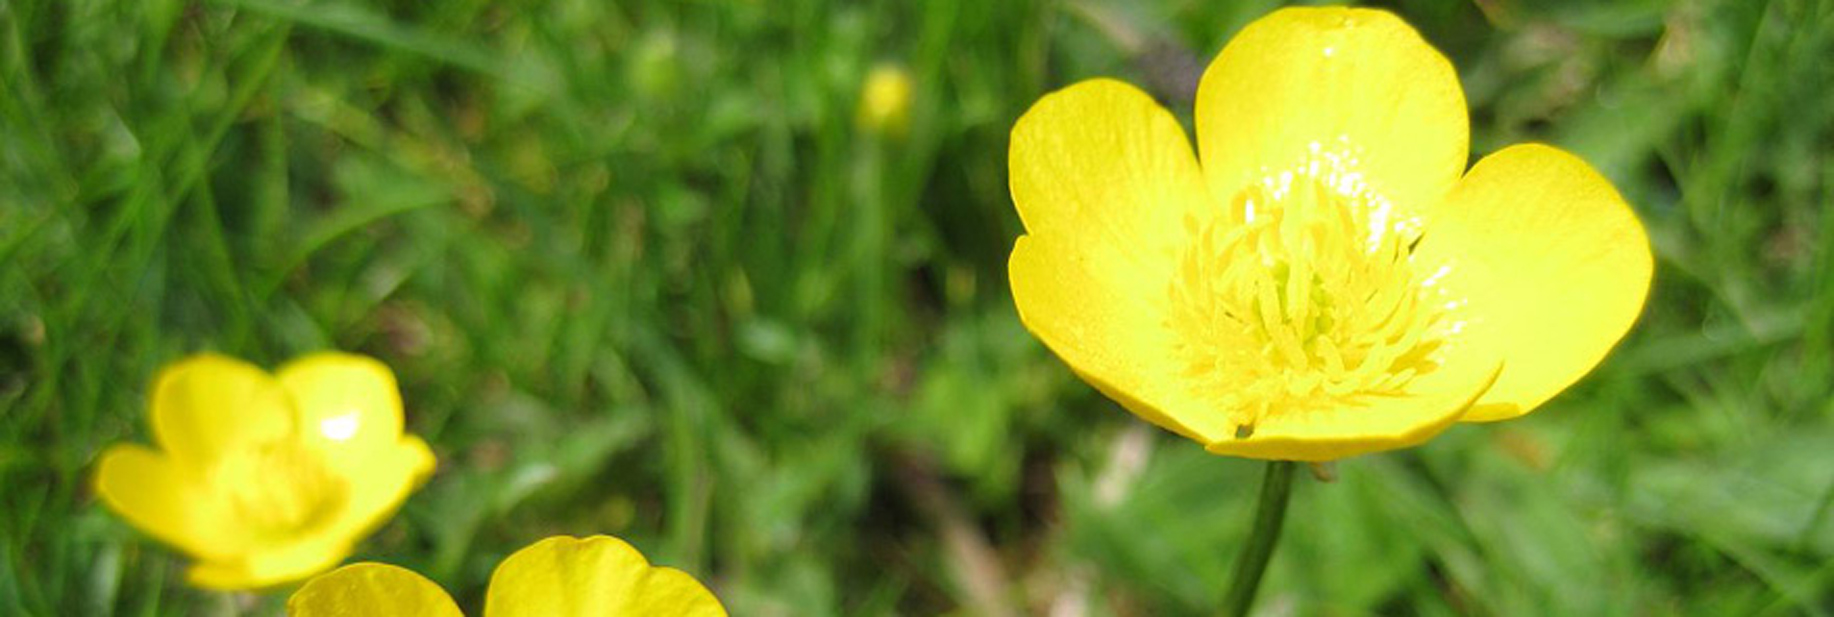 buttercup plant poisonous to dogs